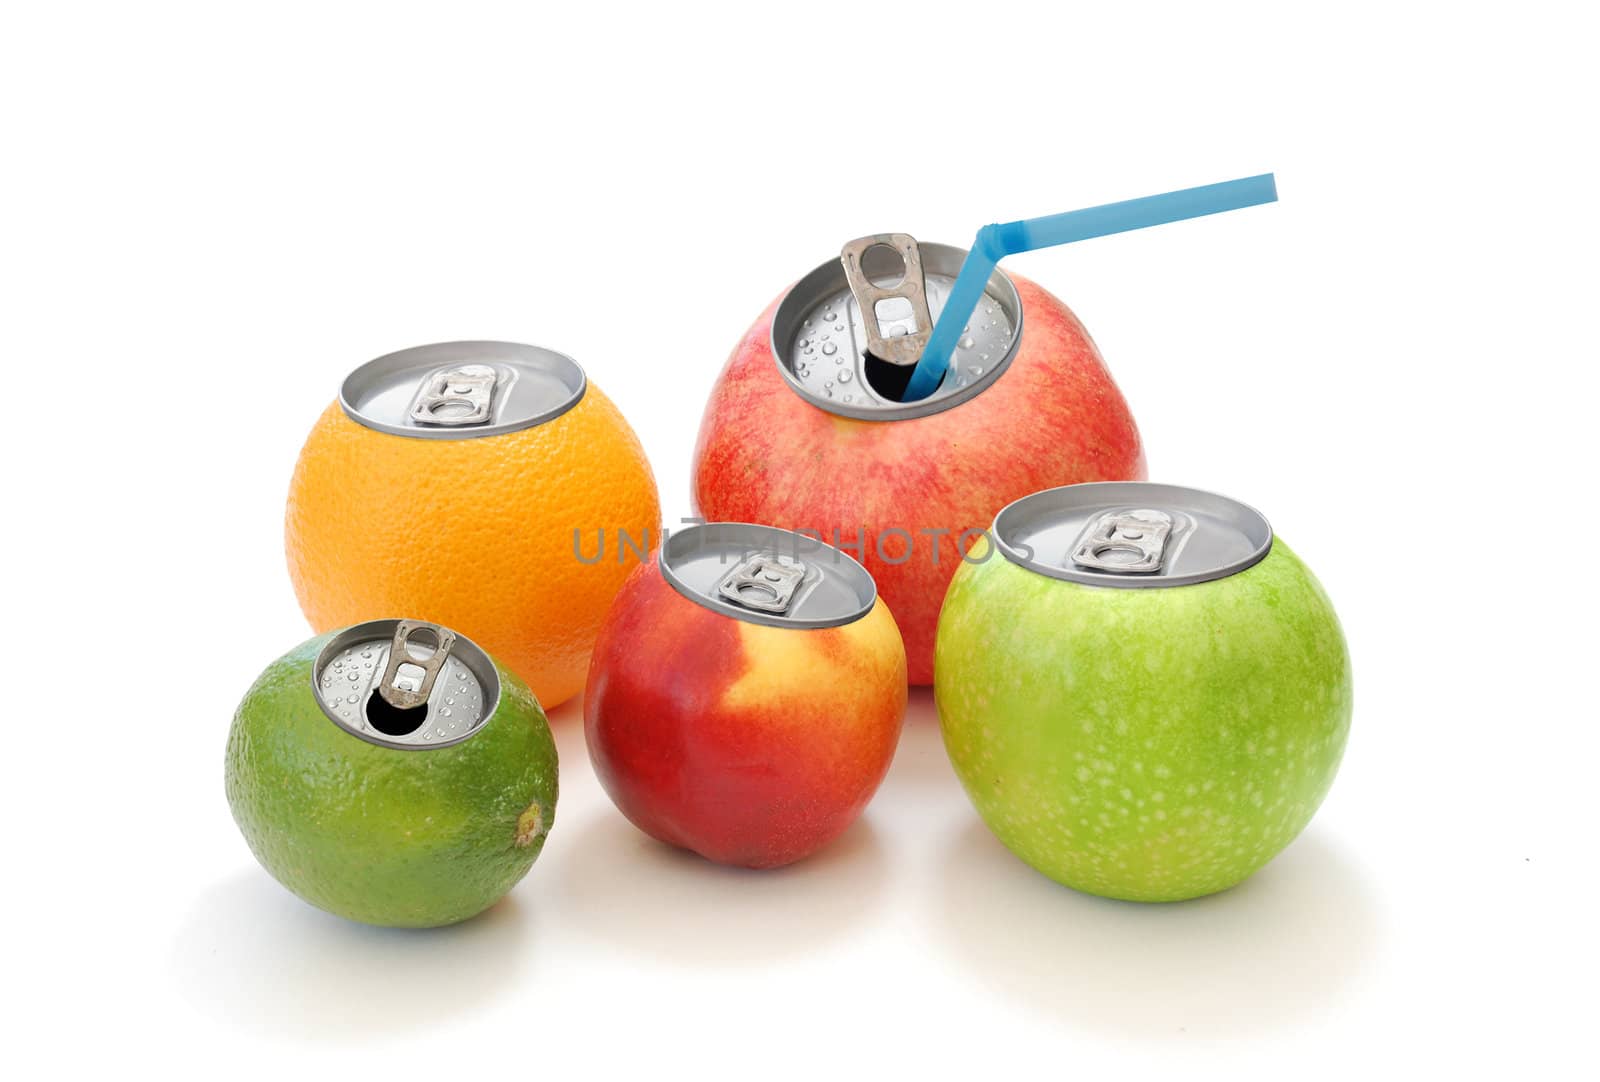 Conceptual image of fruit beverages as aluminium cans